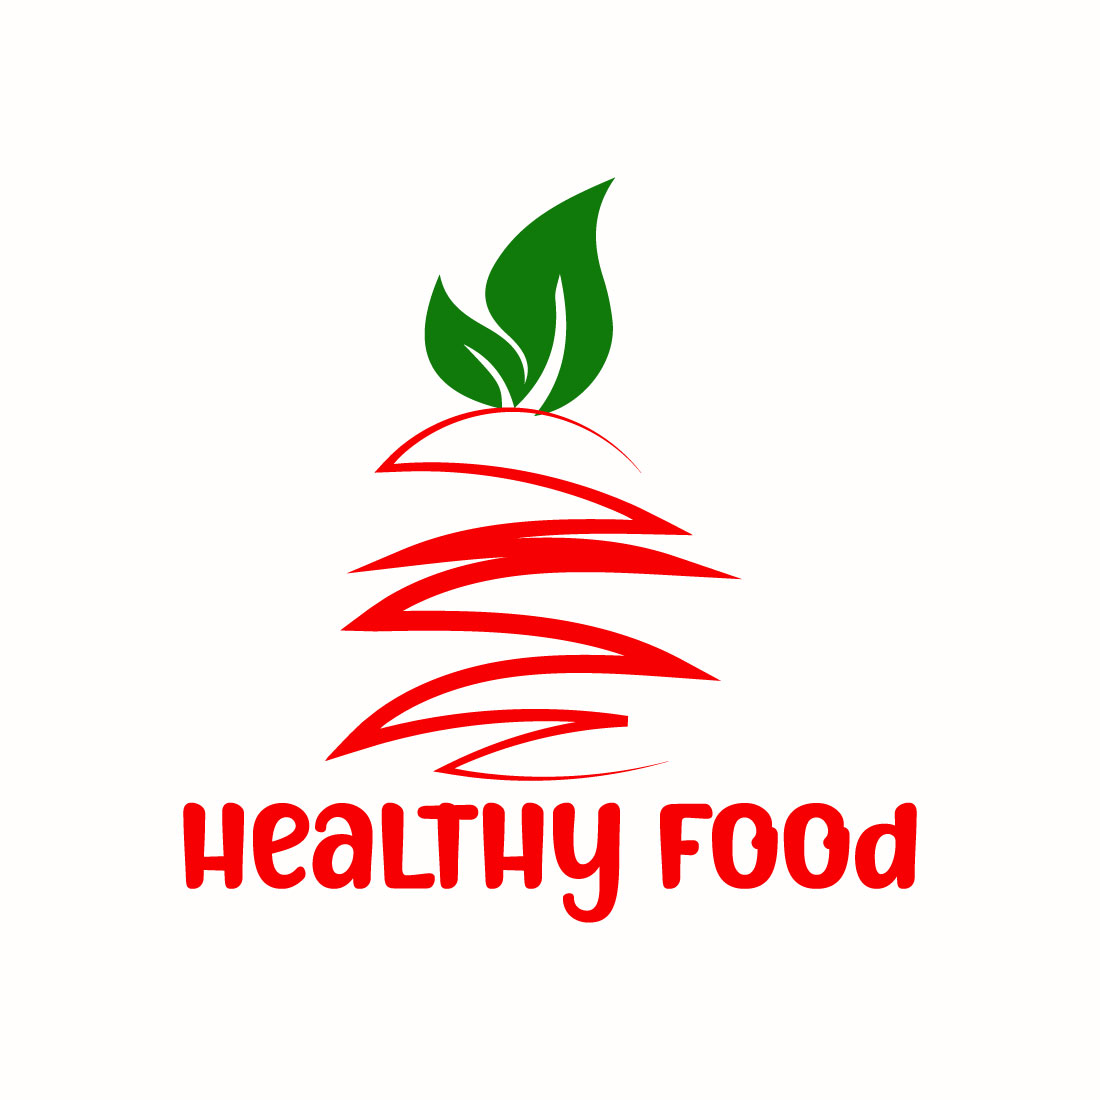 Free Better Health, Better Life logo preview image.